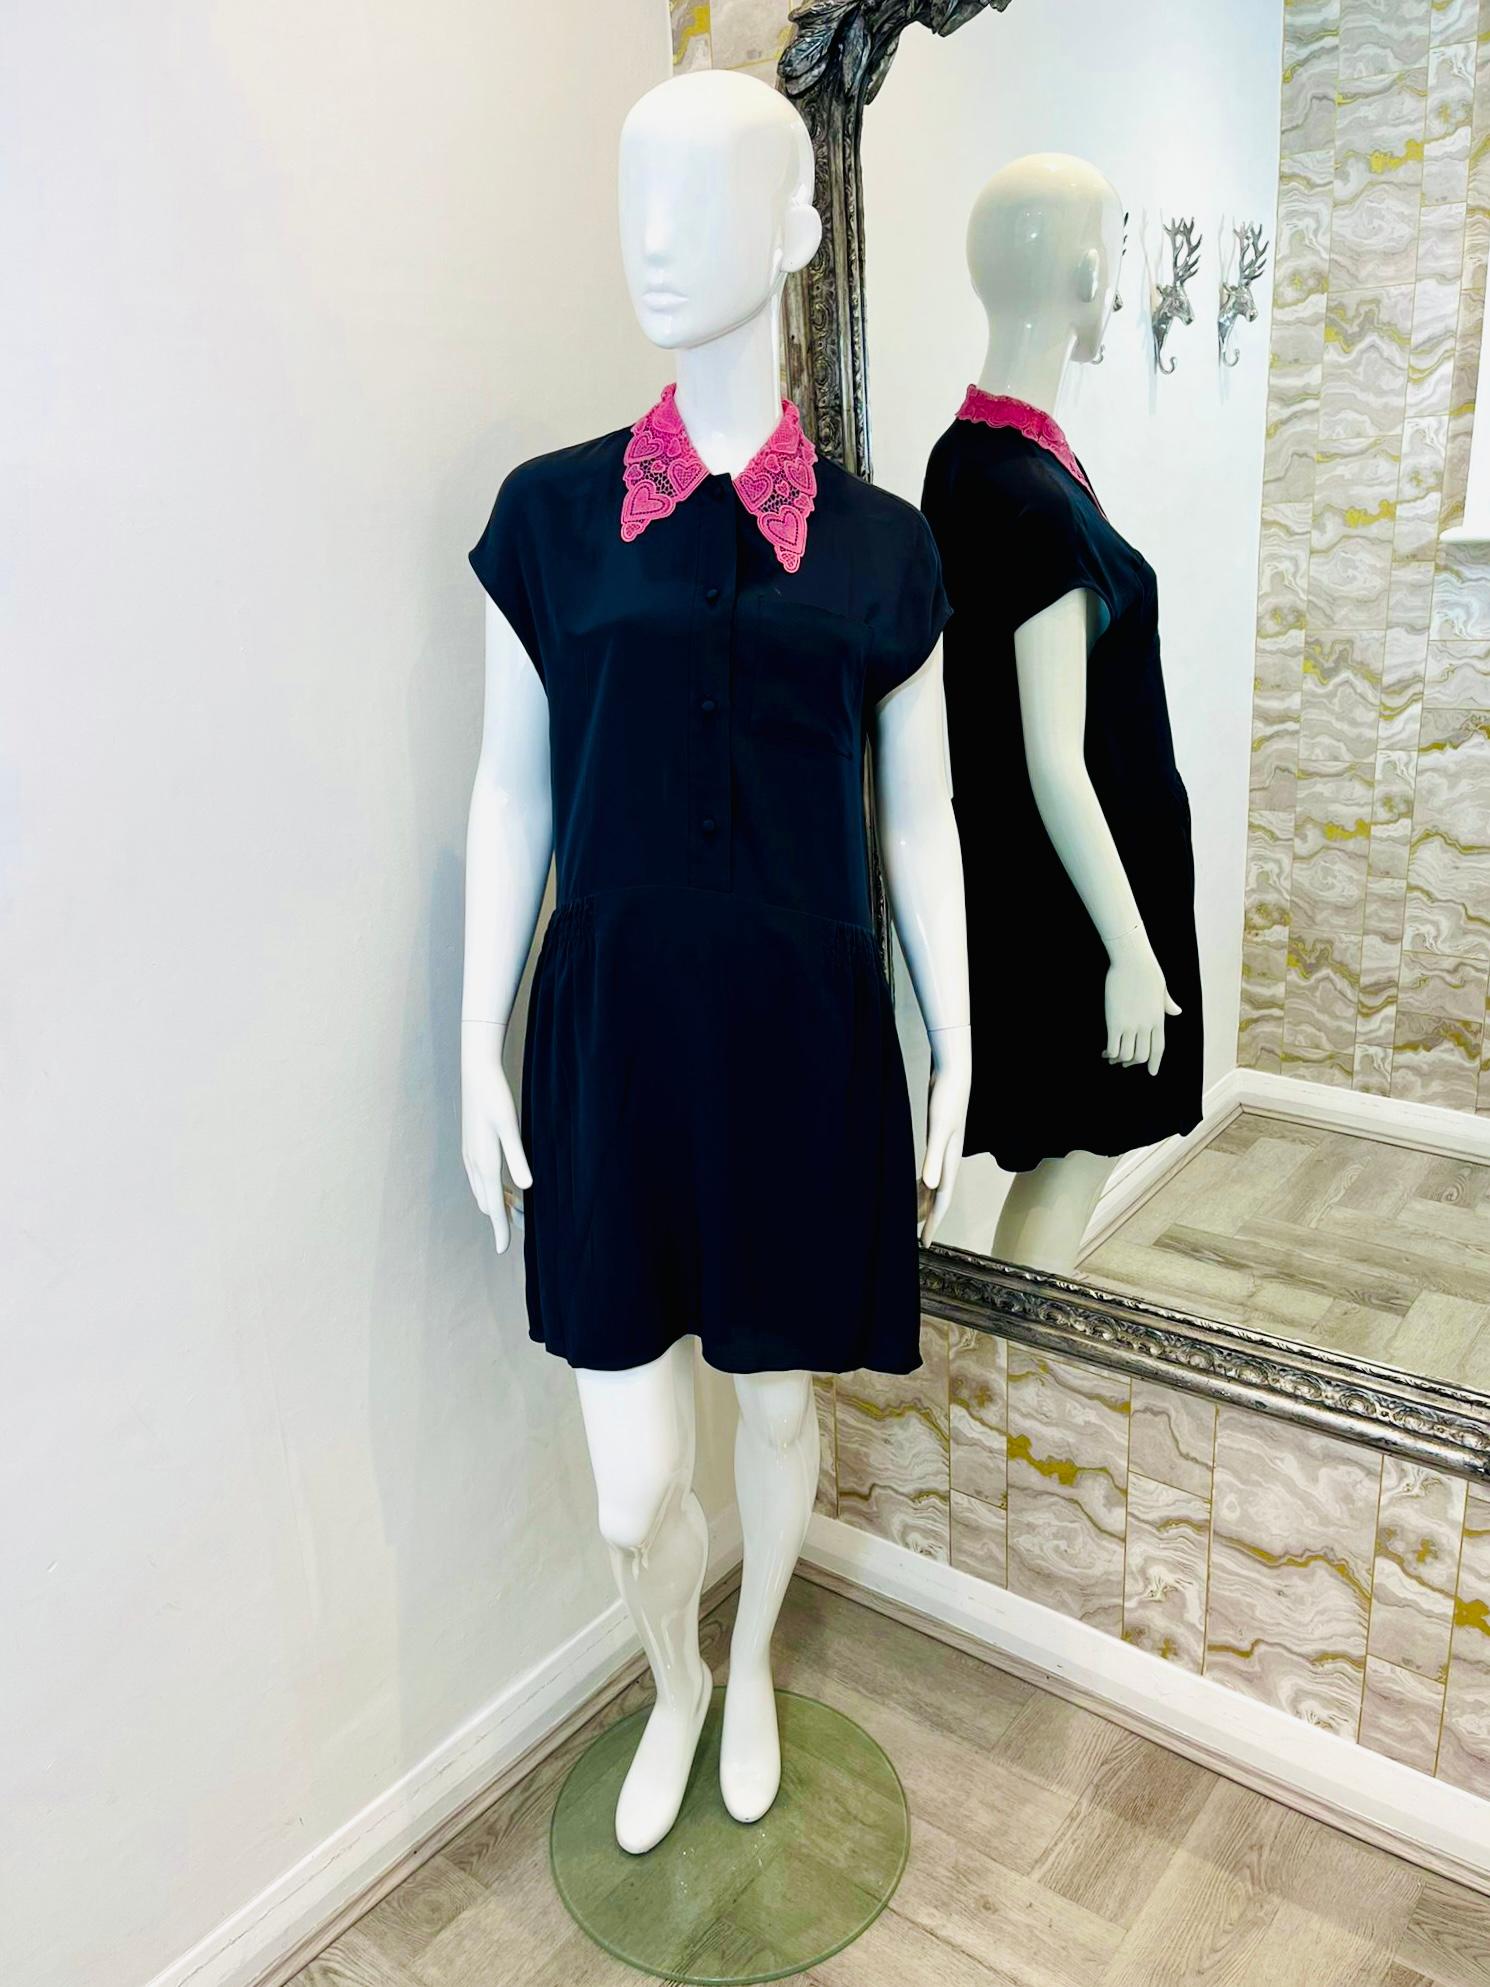 Miu Miu Mini Dress With' Love Heart' Lace Collar

Black mini, shift dress with bright pink lace collar that has love hearts.

Size - 42IT

Condition - Very Good

Composition - Silk